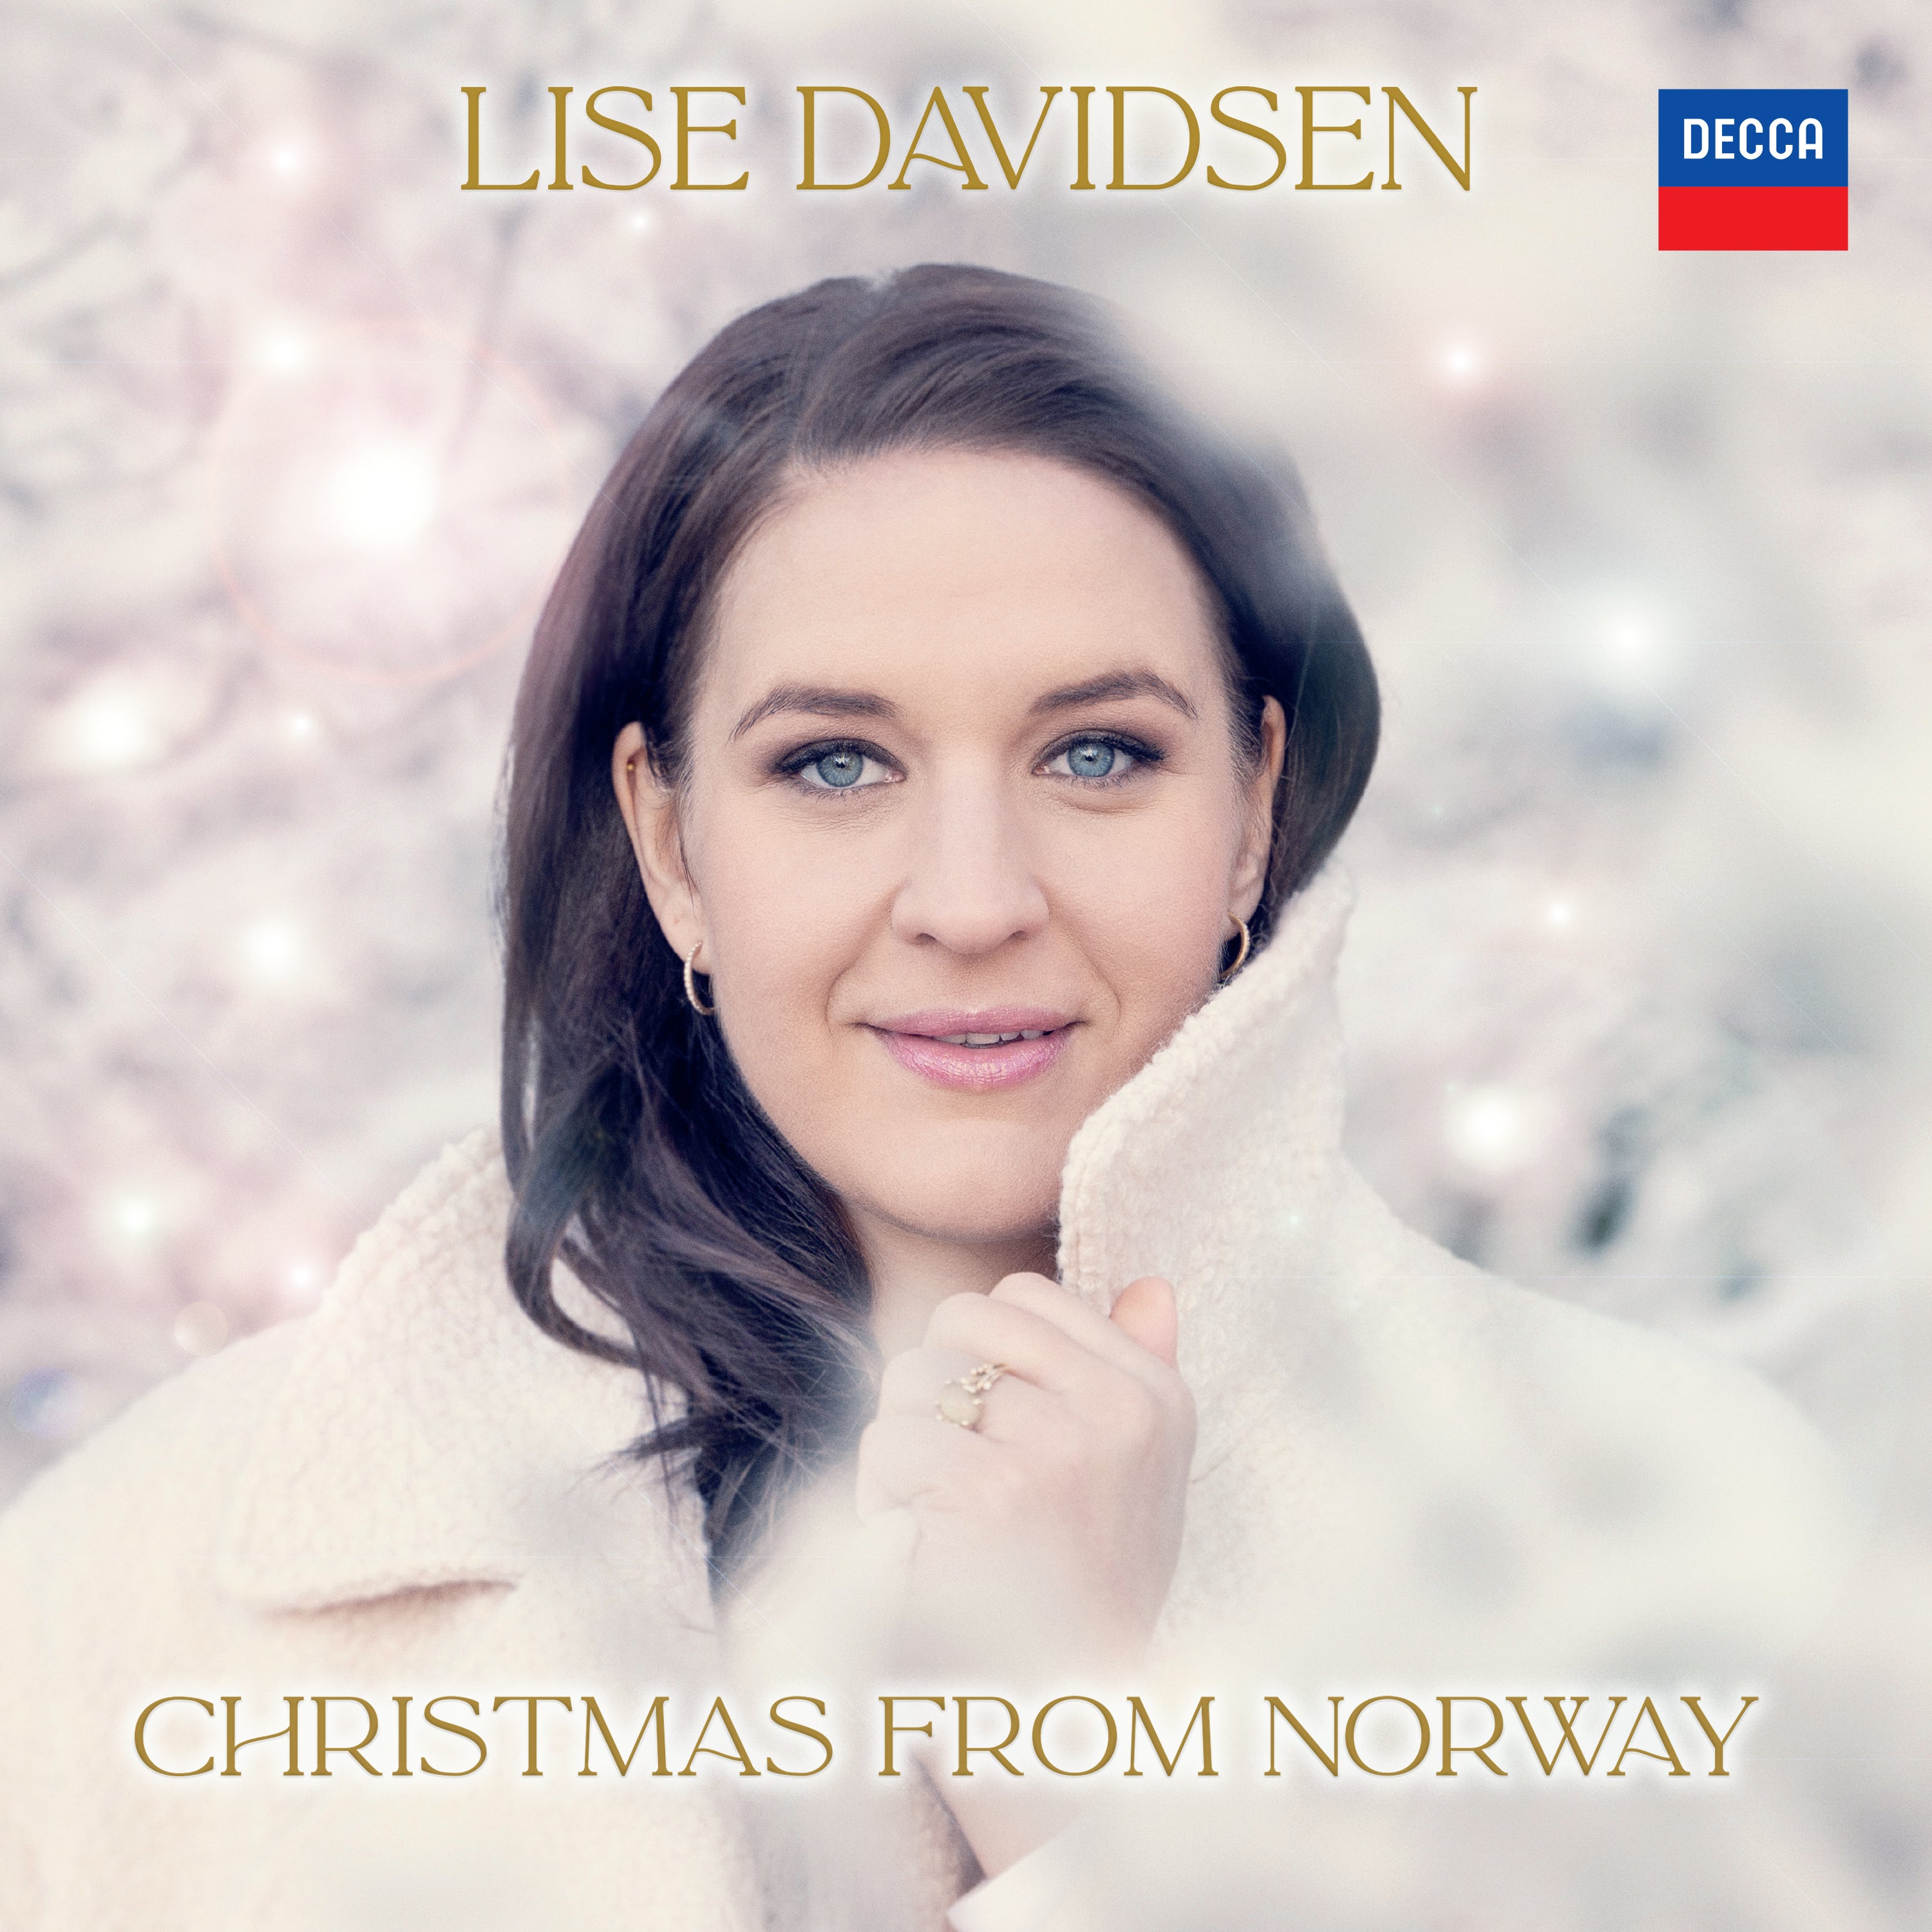 Lise Davidsen - Christmas from Norway: Signed CD